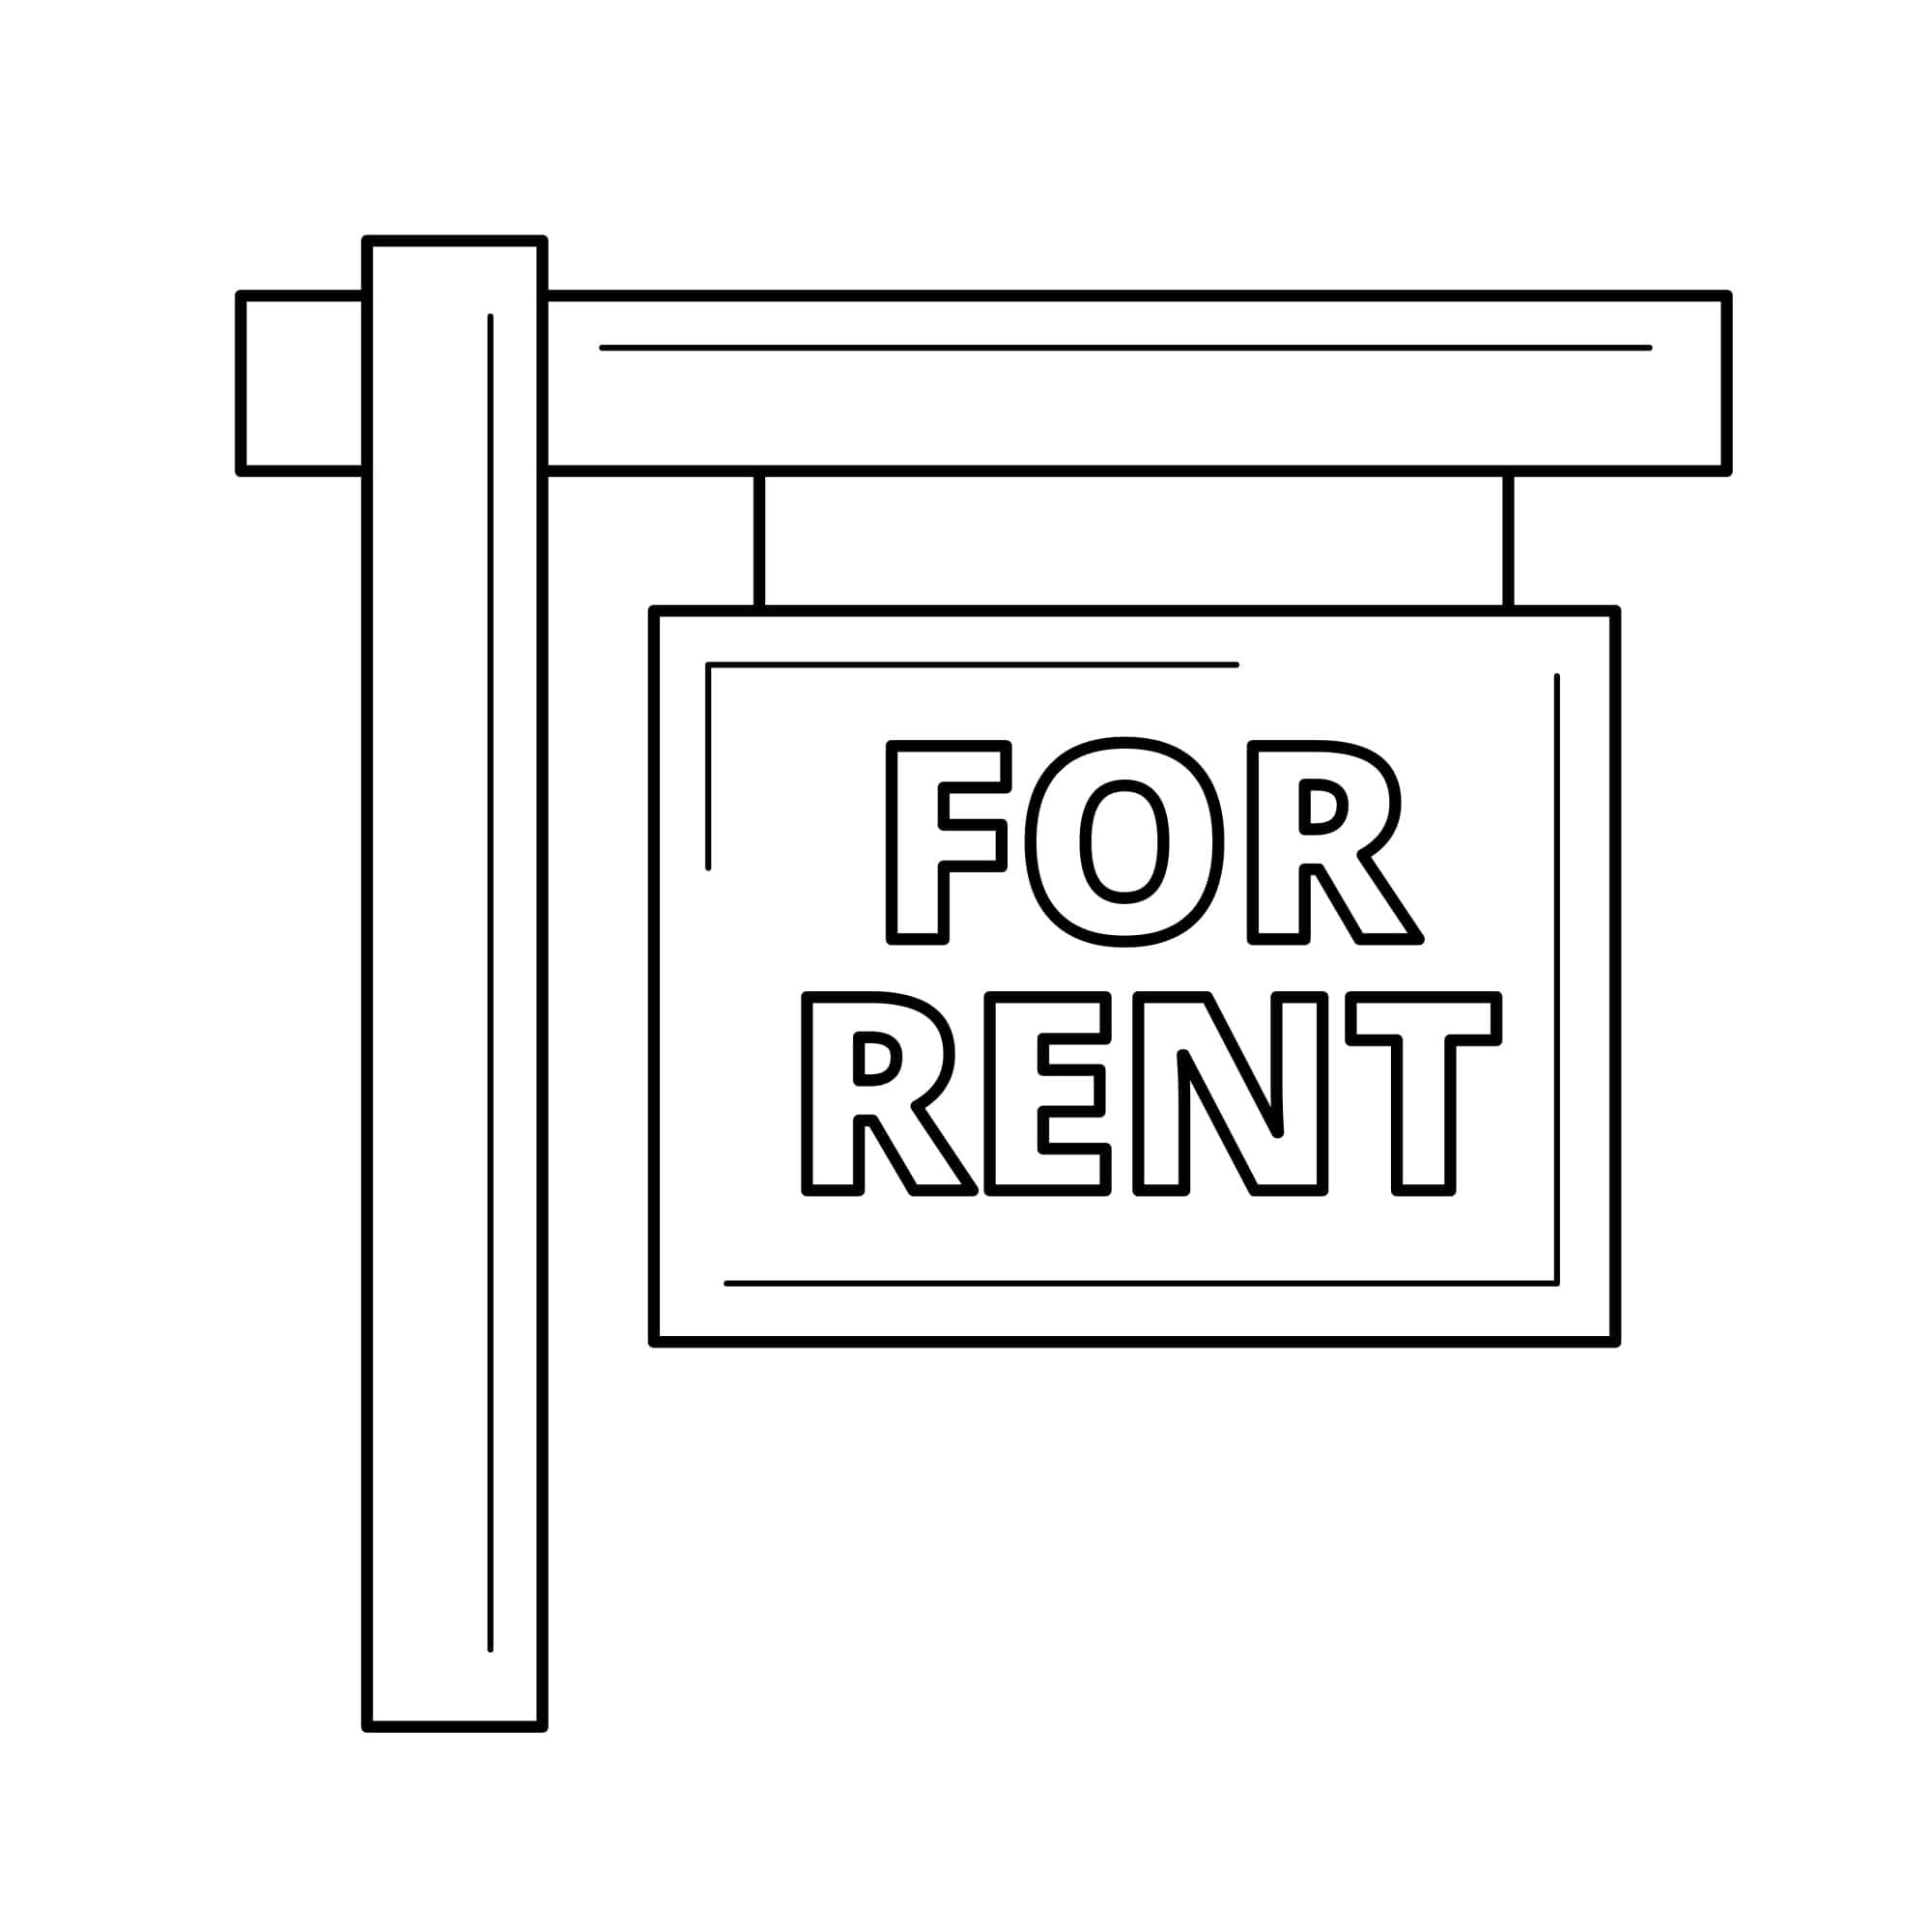 Homes for Rent: An Investor's Guide to Renting Out a House